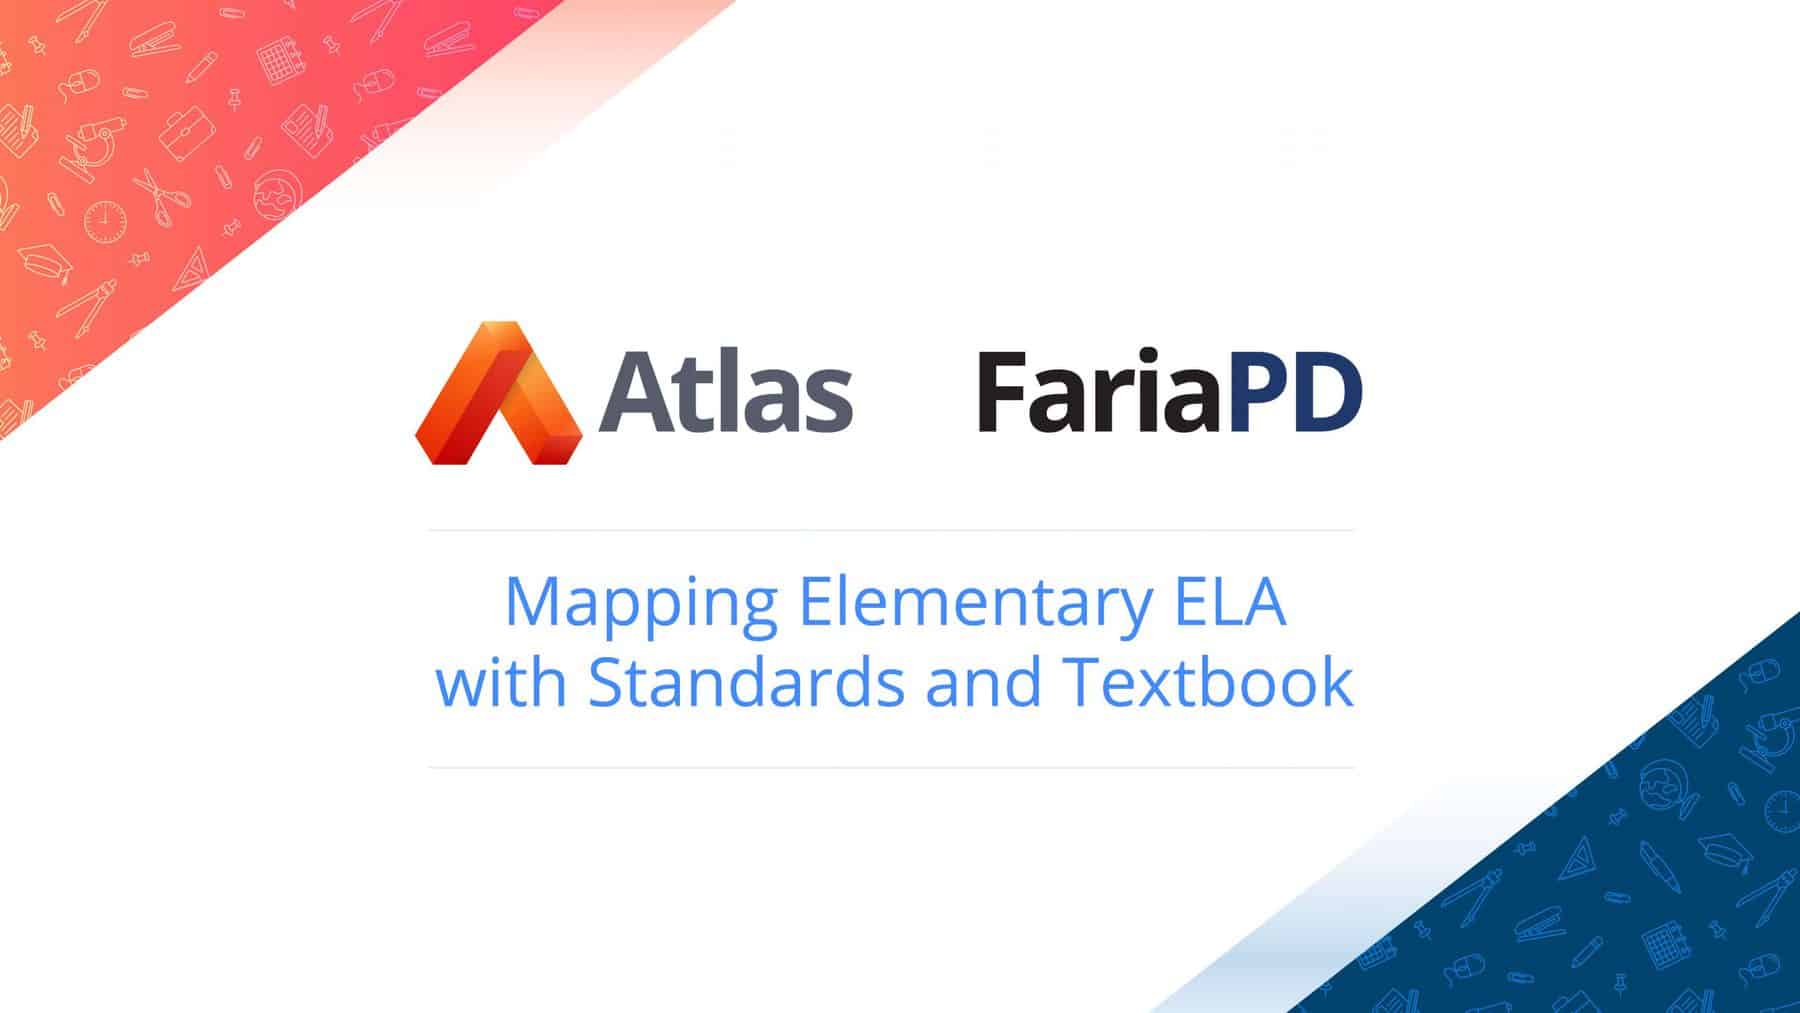 Mapping Elementary ELA with Standards and Textbook